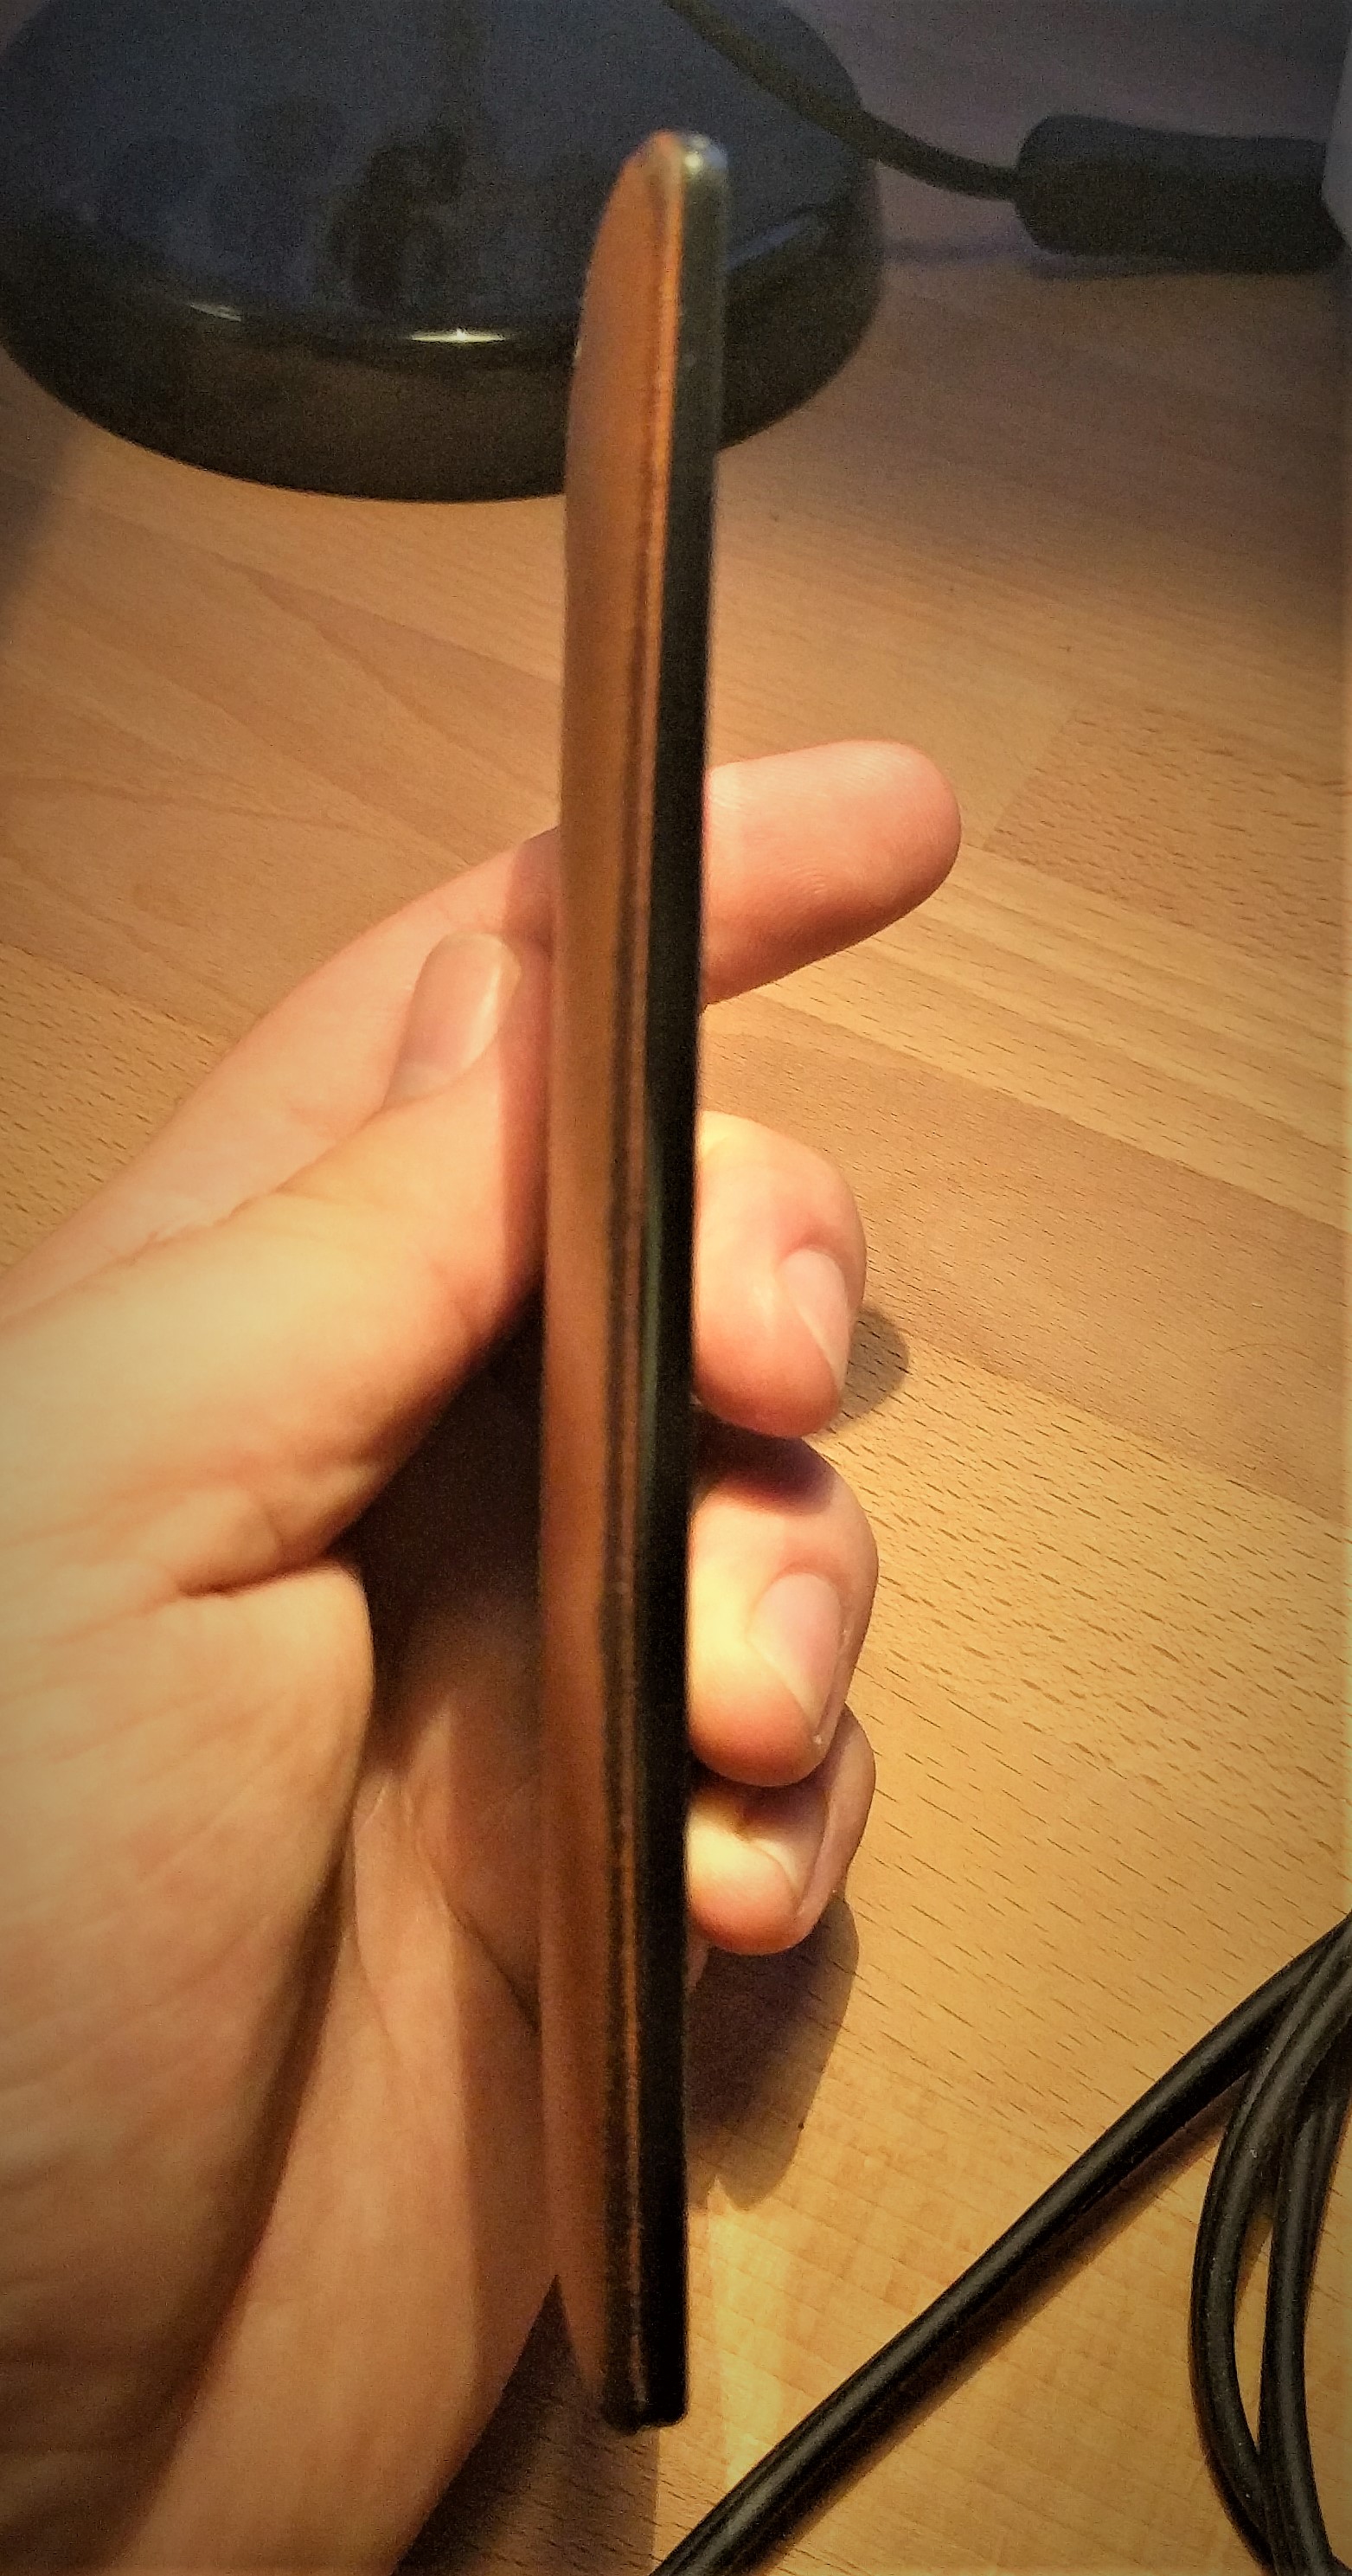 Side on view of LG G4